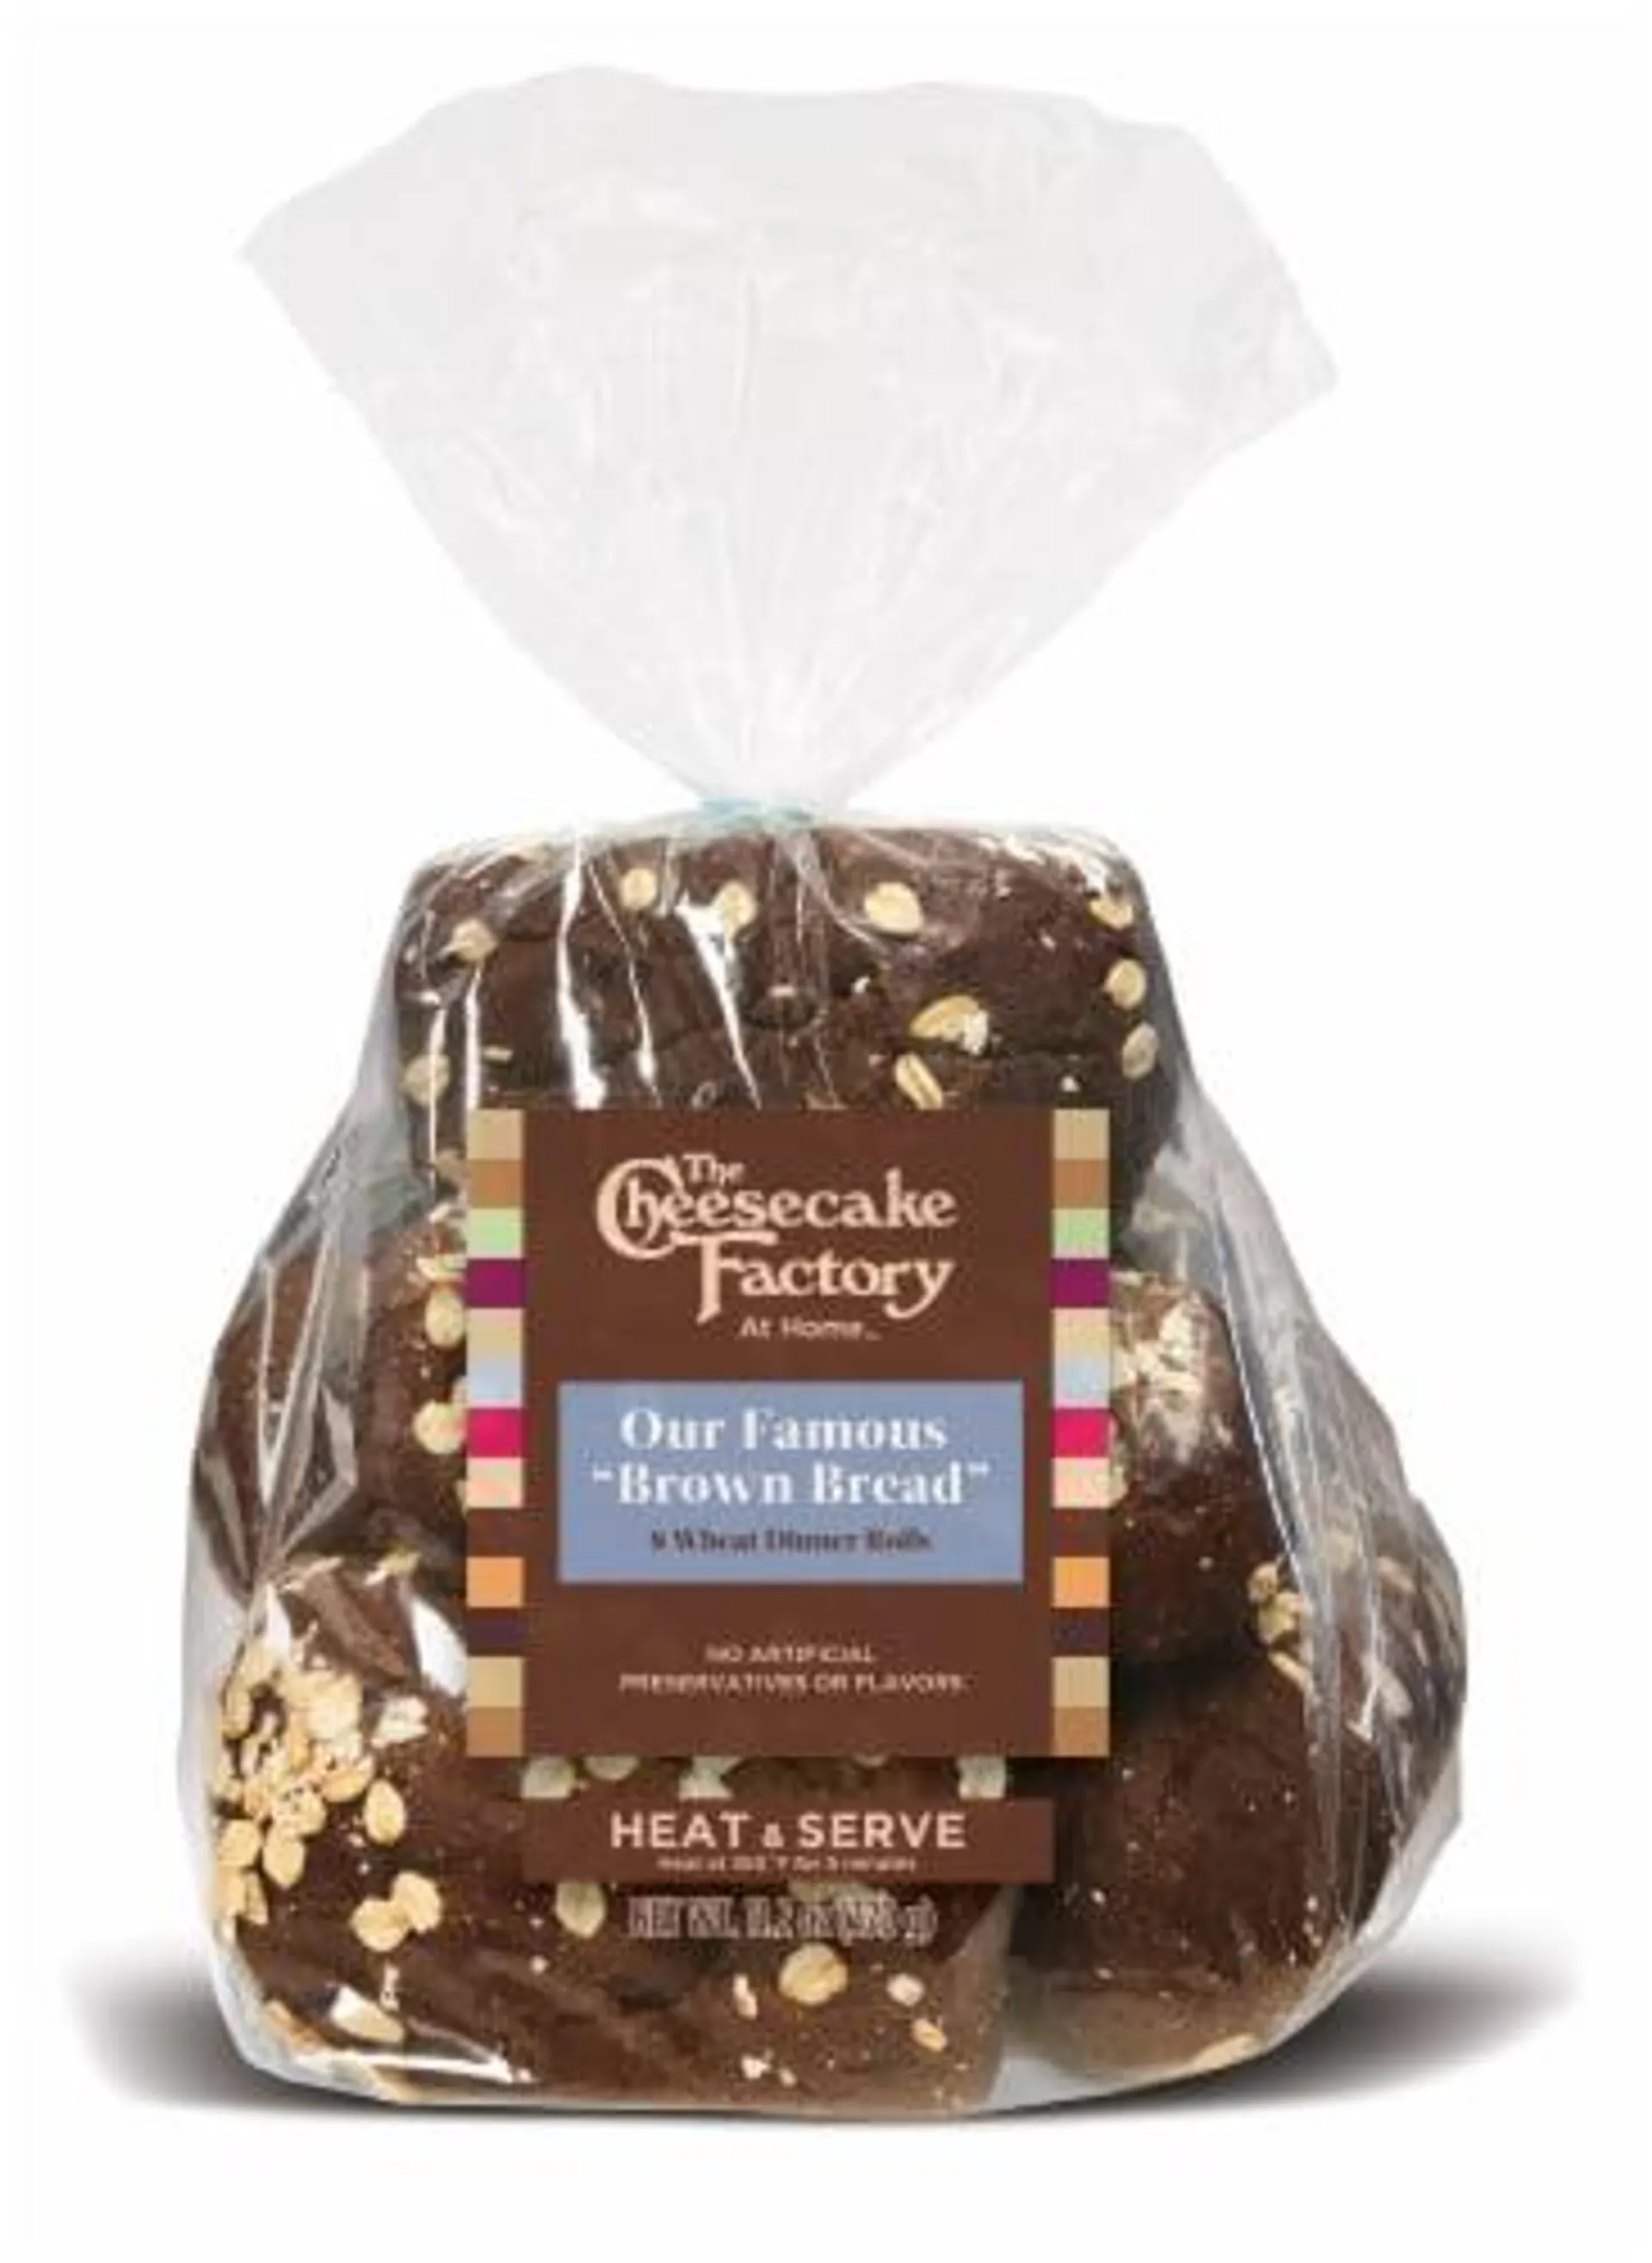 The Cheesecake Factory At Home Brown Bread Wheat Dinner Rolls